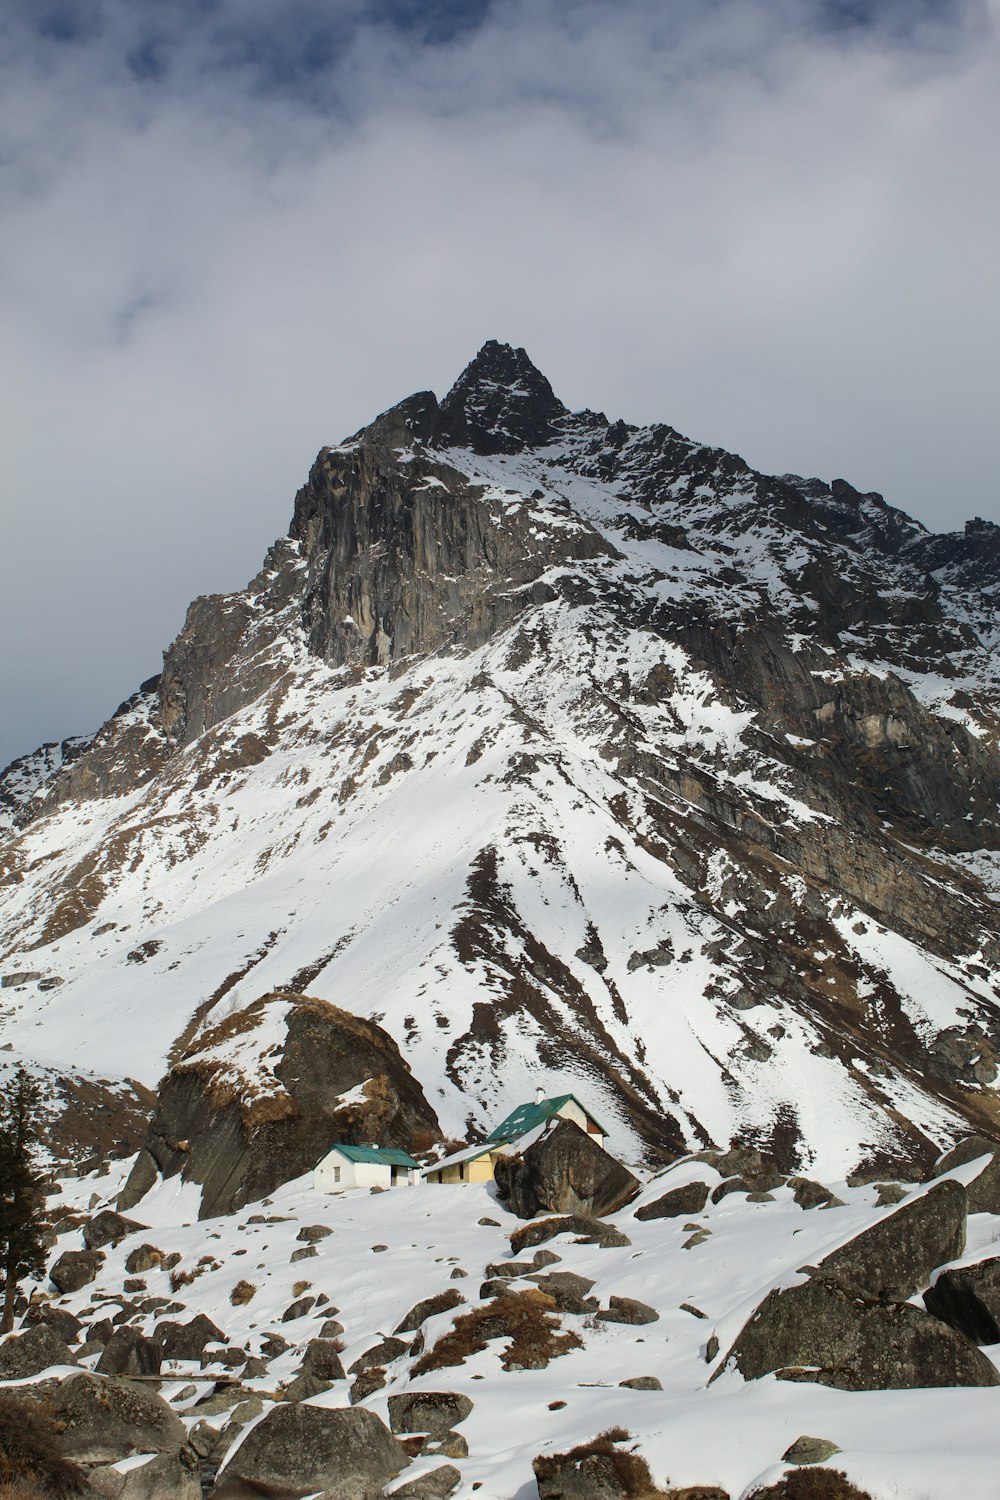 a snow covered mountain with a tent in the foreground